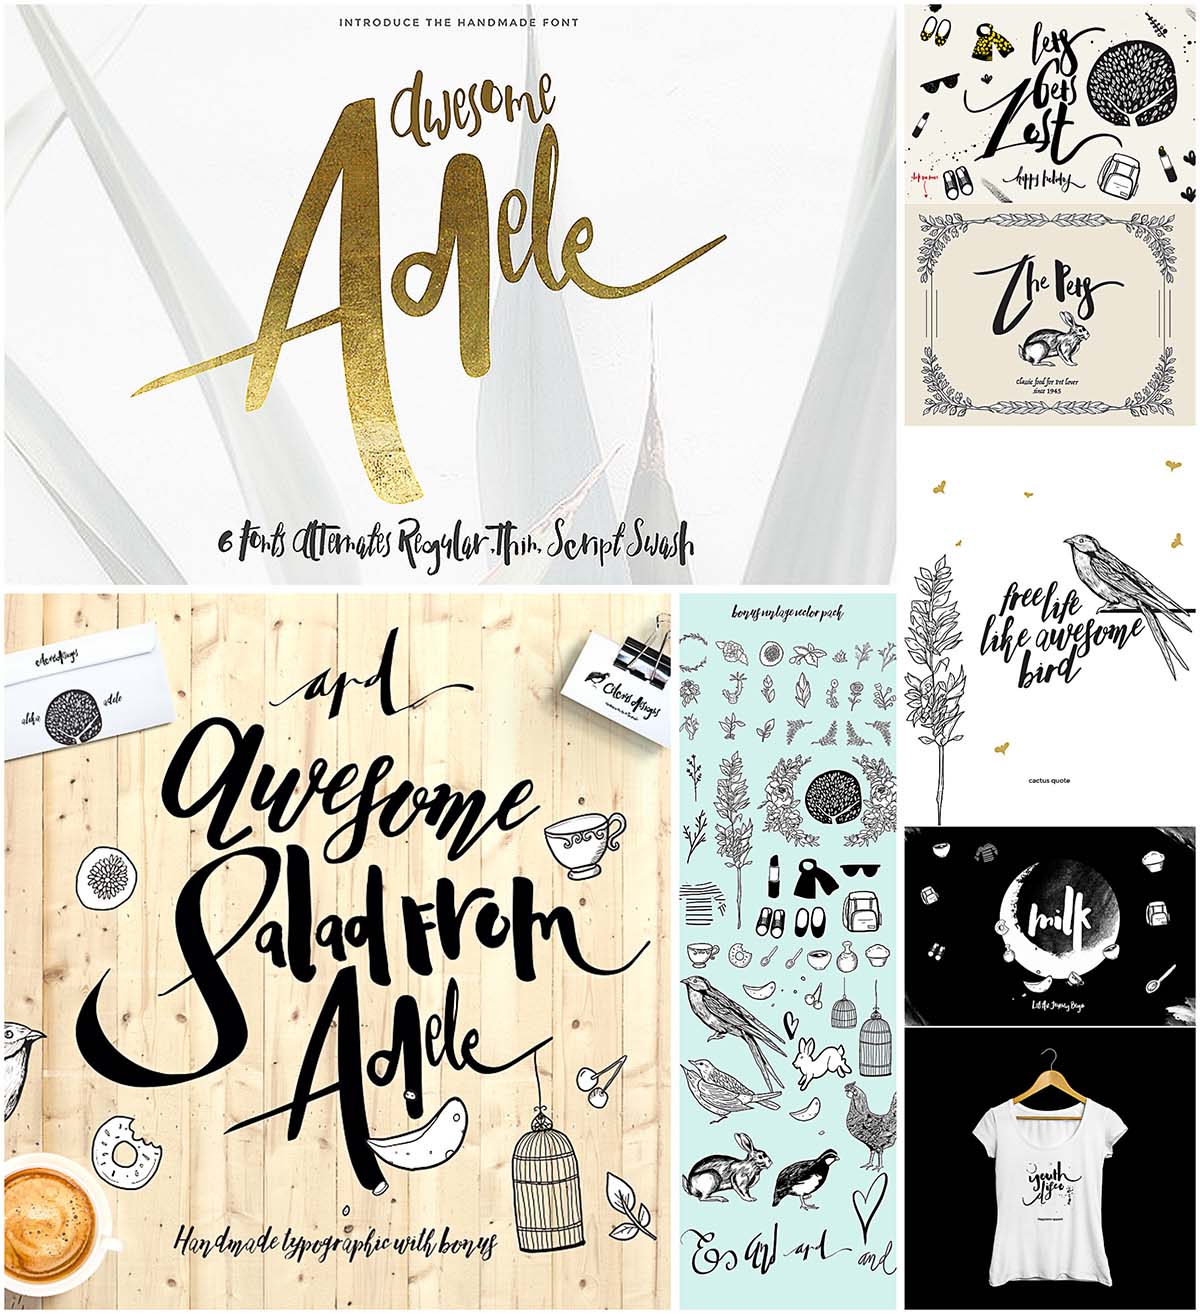 Adele Awesome hand darwn font and illustrations